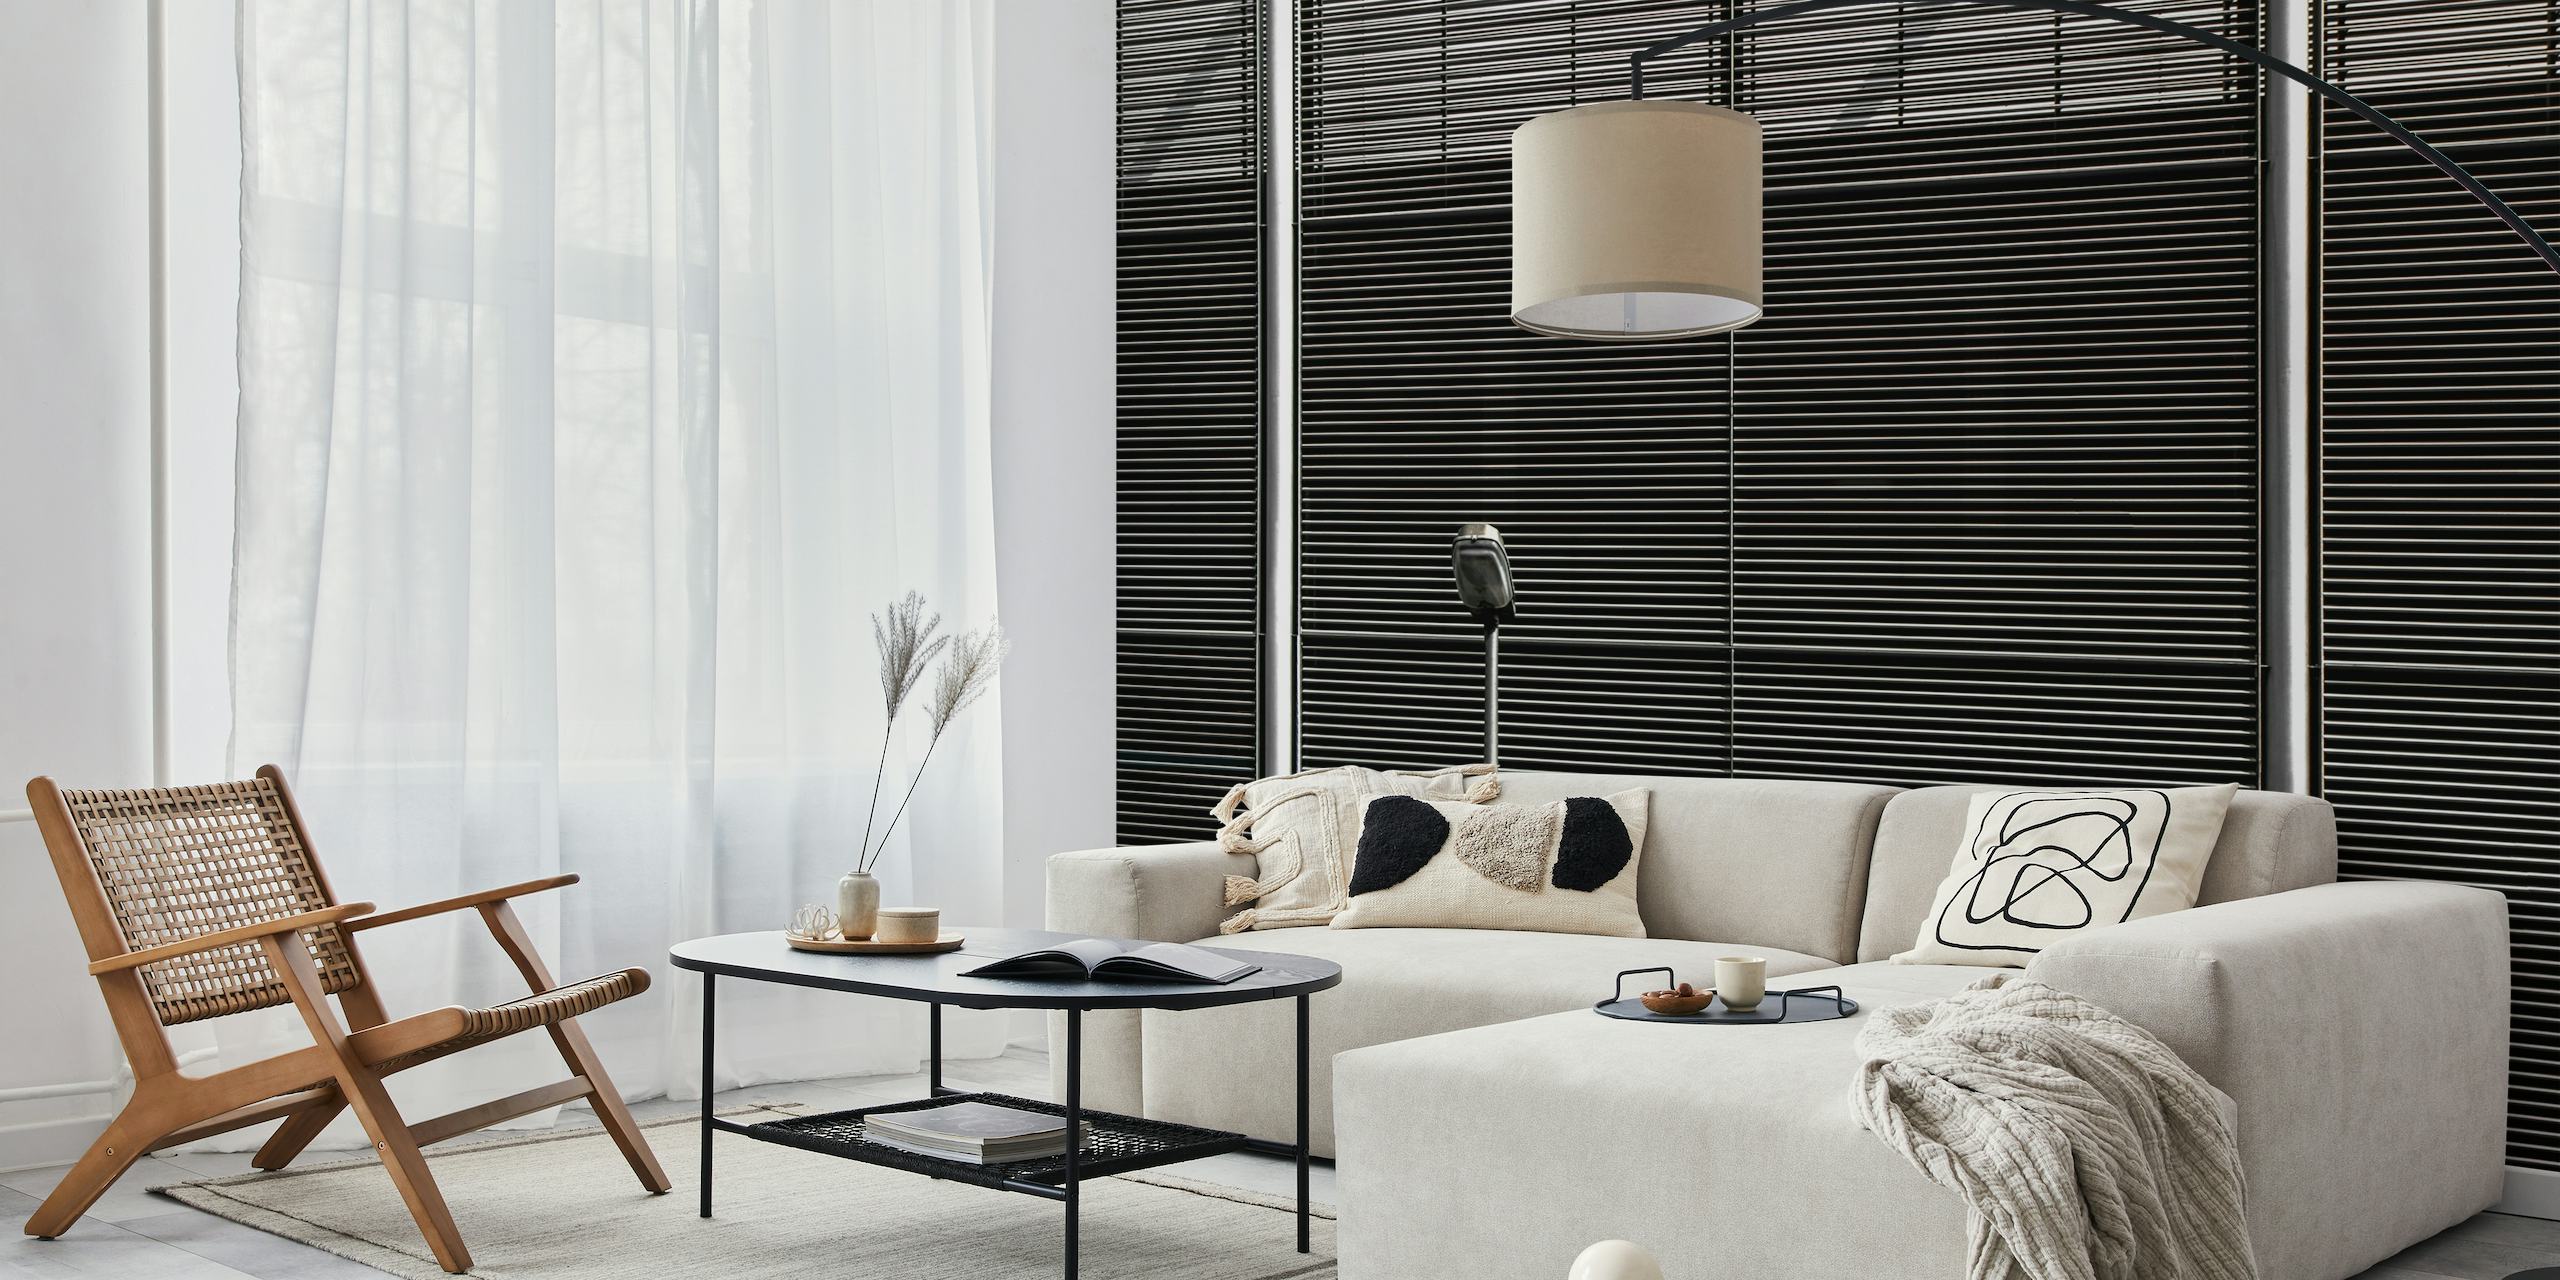 Abstract symmetrical pattern of metal blinds wall mural